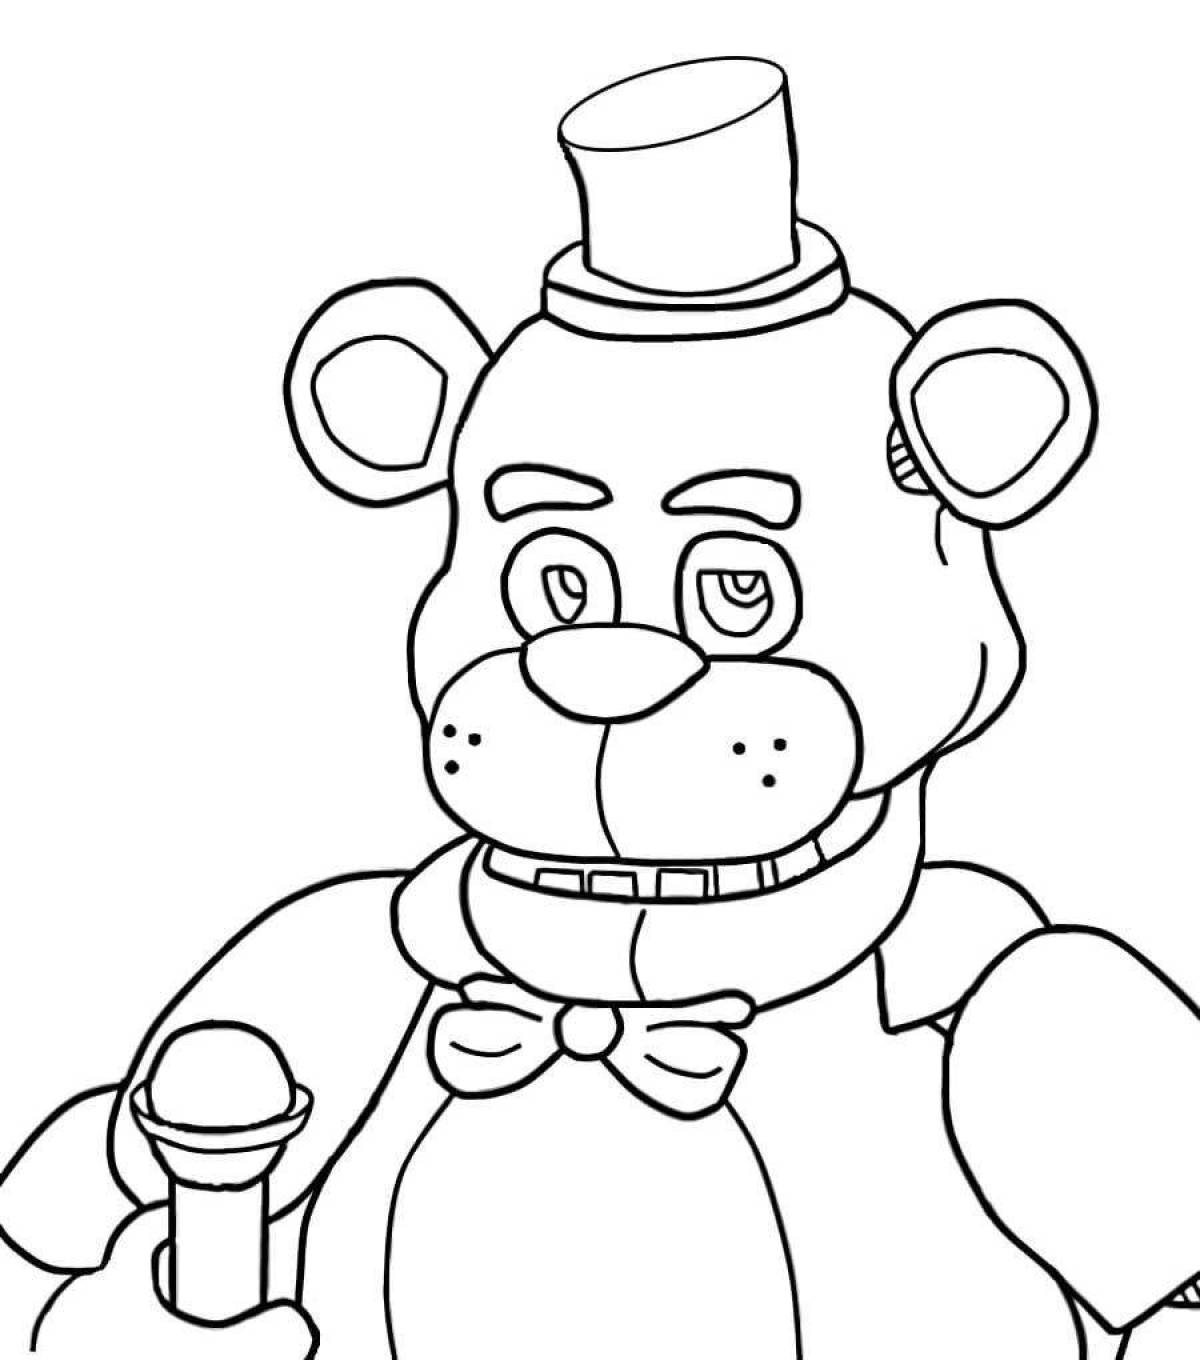 Coloring live old freddy